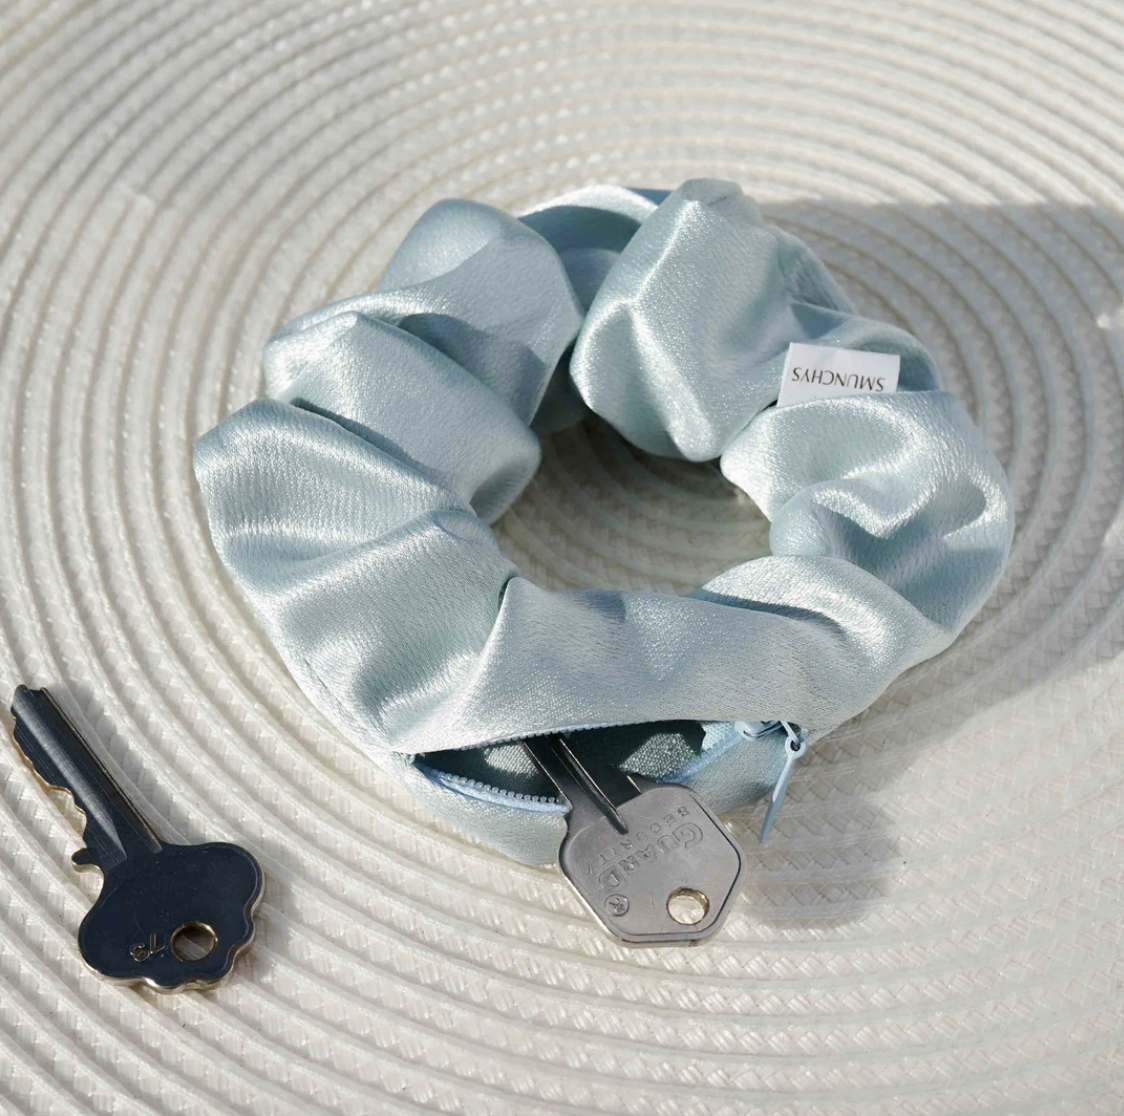 the blue satin scrunchy with the zipper open and a key poking out